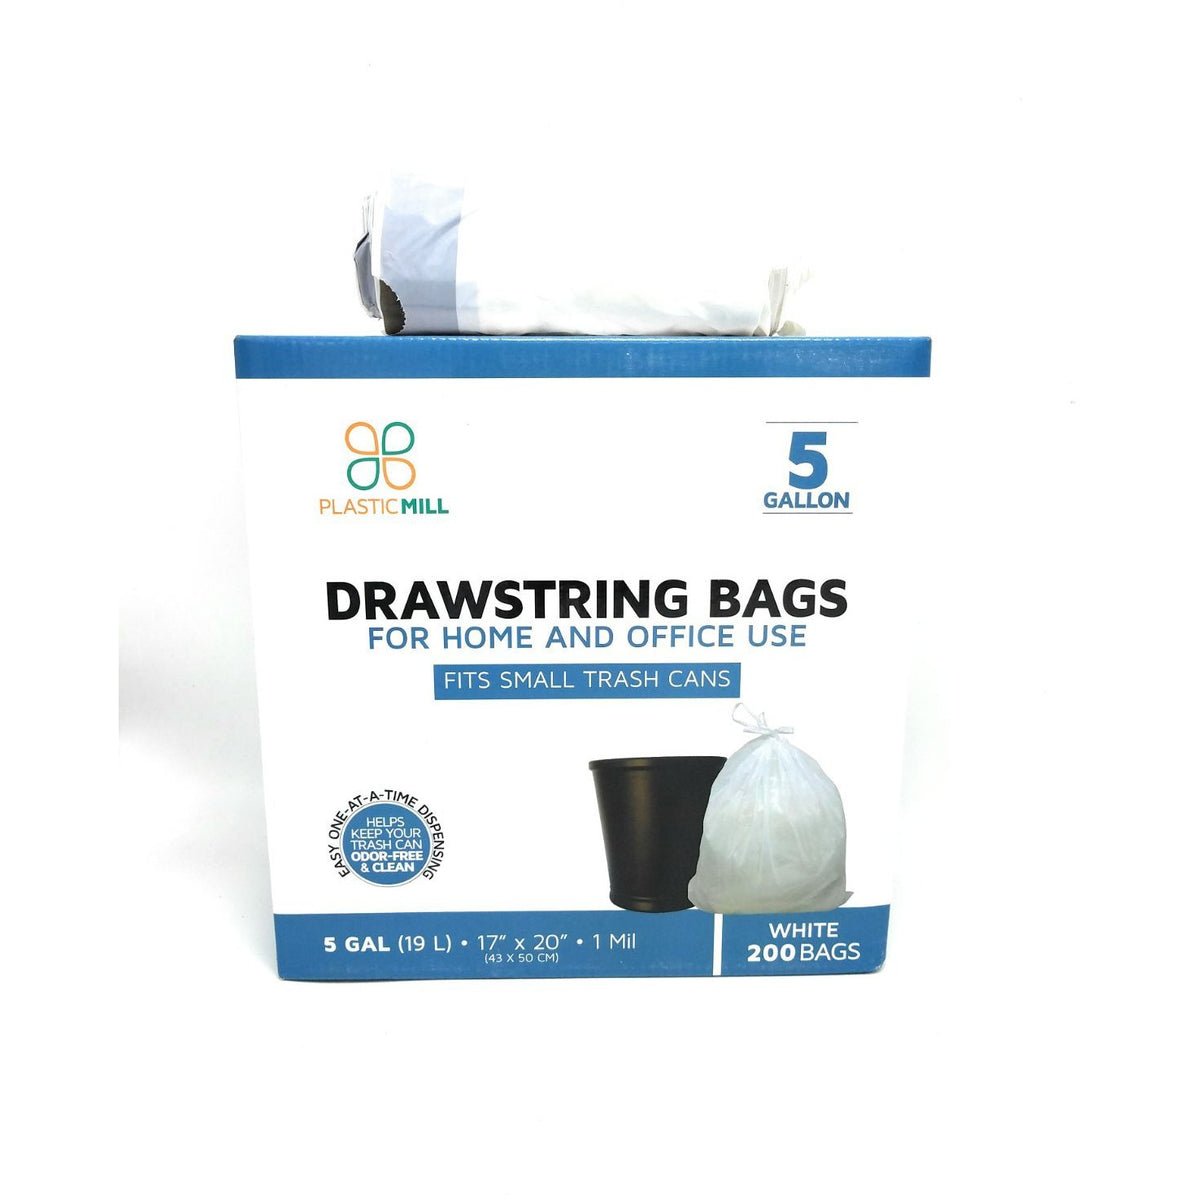 PlasticMill 65 Gallon Blue 1.5 Mil 50x48 100 Bags/Case Garbage Bags.